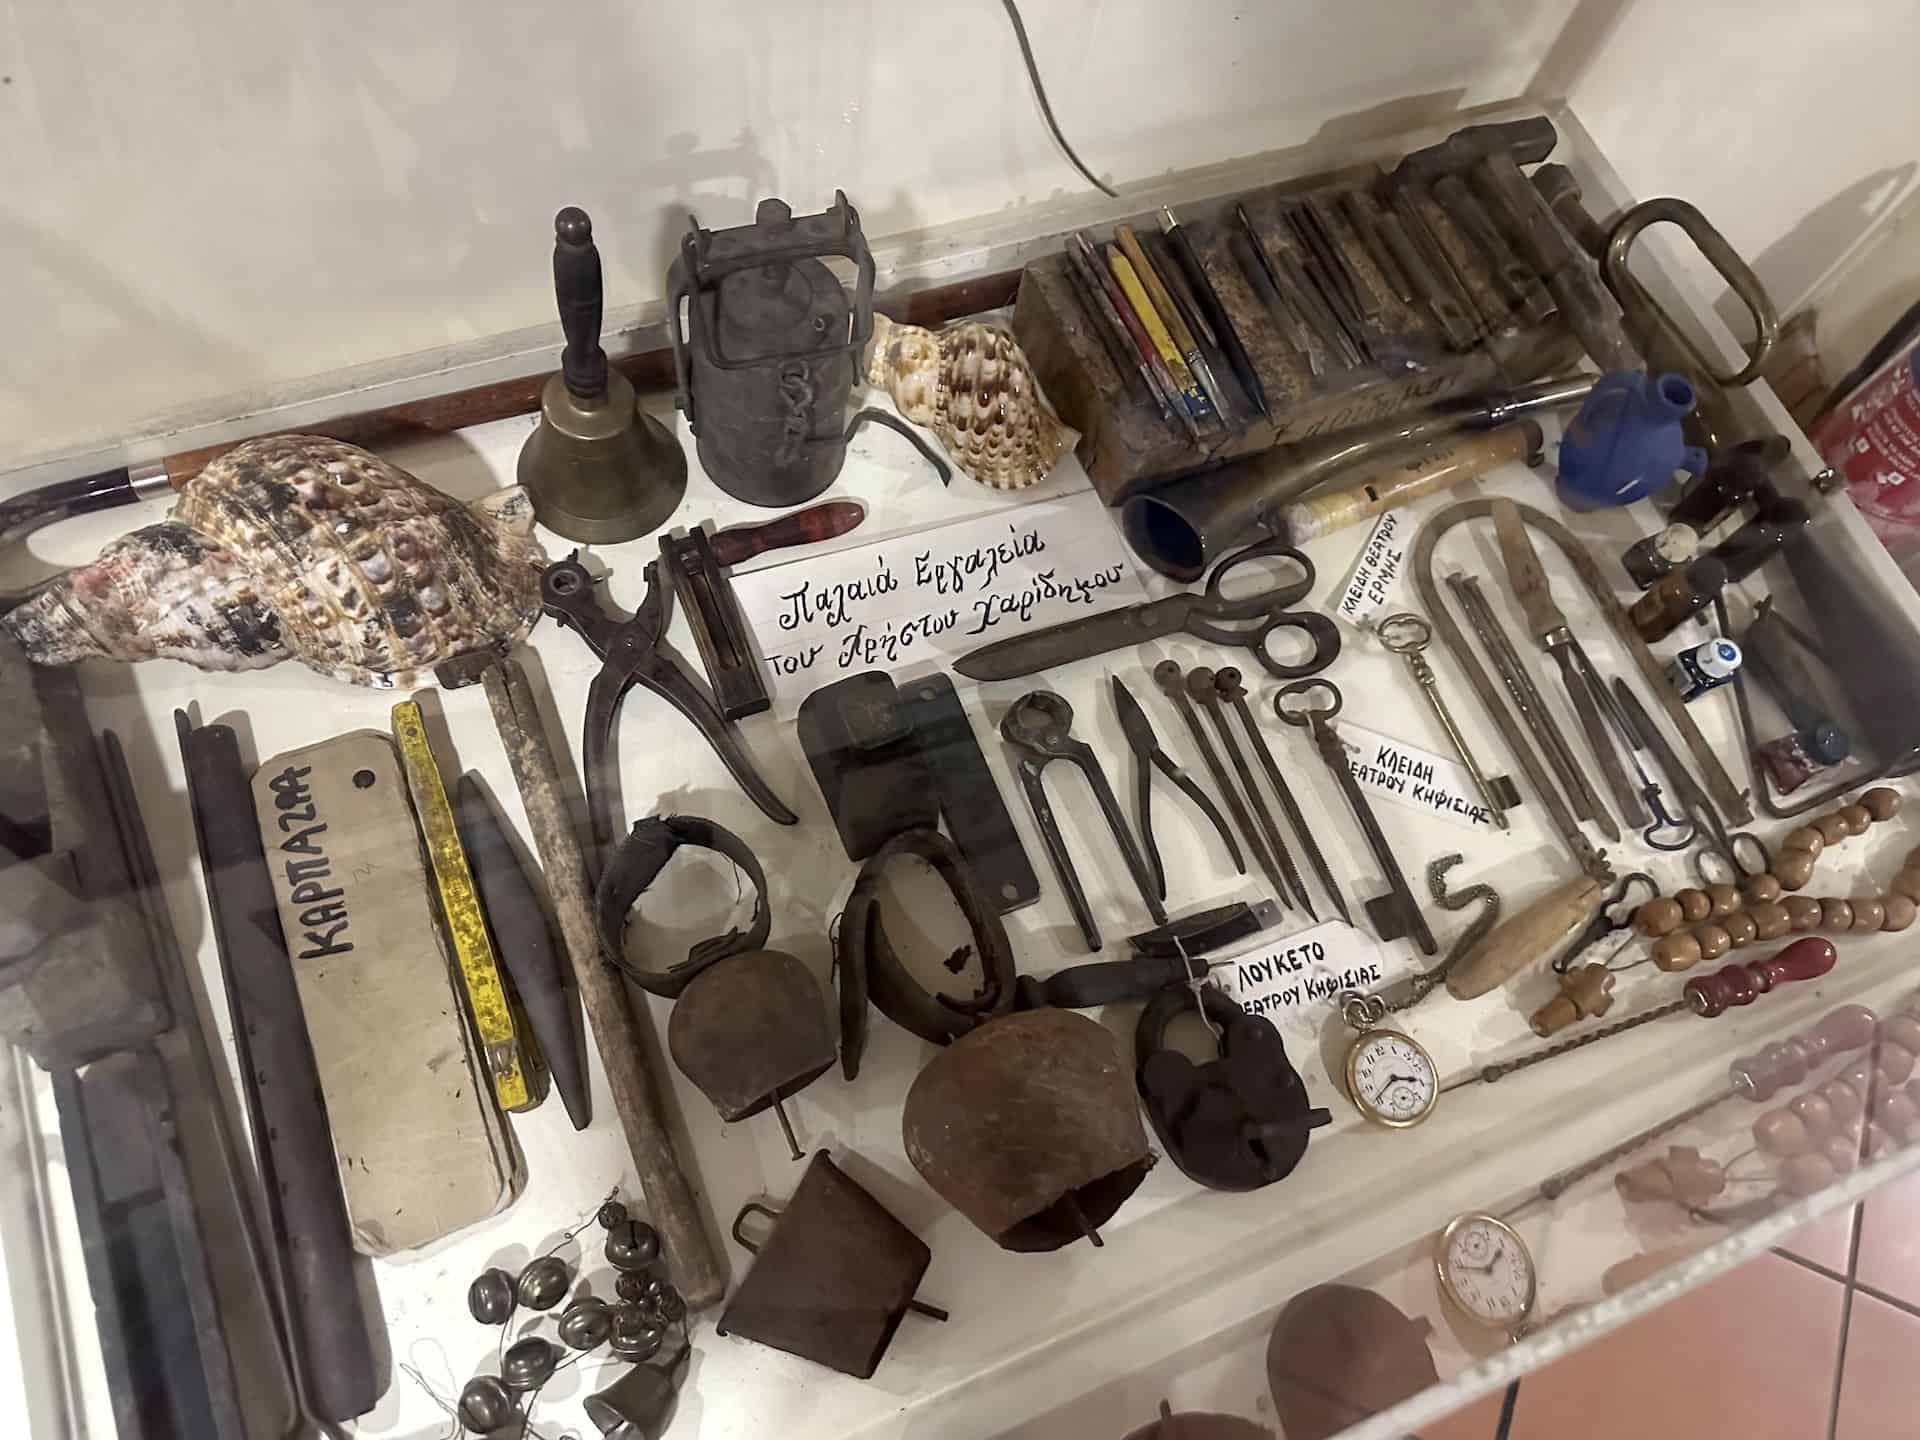 Tools used by Christos Haridimos at the Melina Mercouri Cultural Centre in Thiseio, Athens, Greece